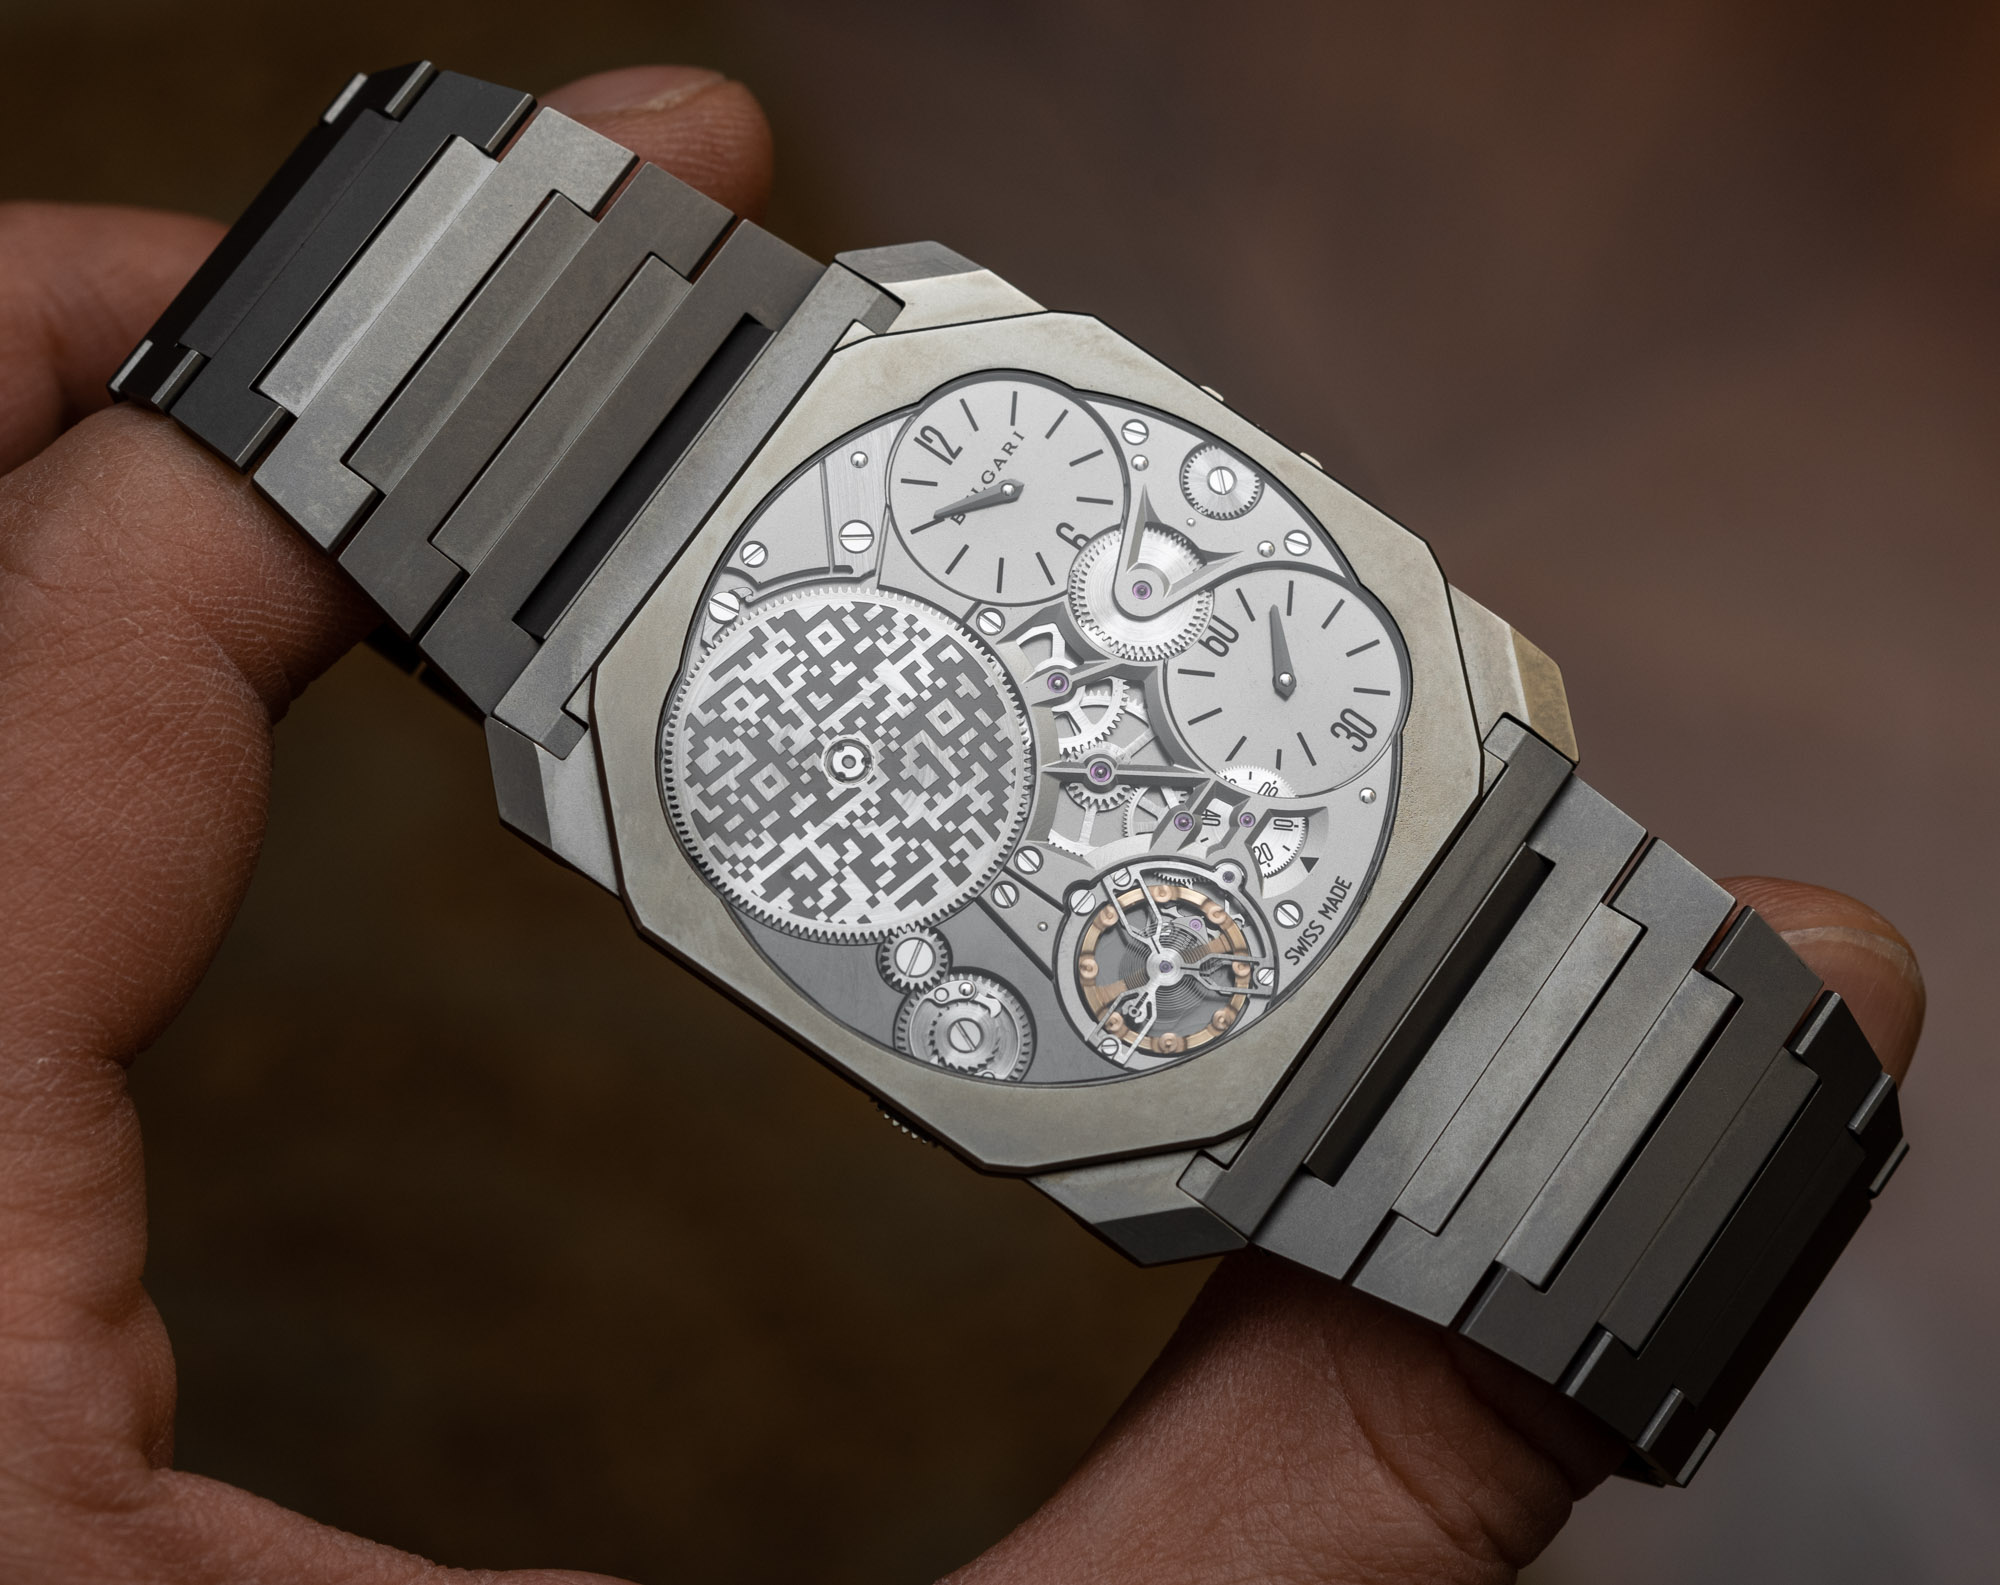 Hands-On: Bulgari Octo Finissimo Ultra Is Watchmaker's 8th Record-Thin  Luxury Watch | aBlogtoWatch